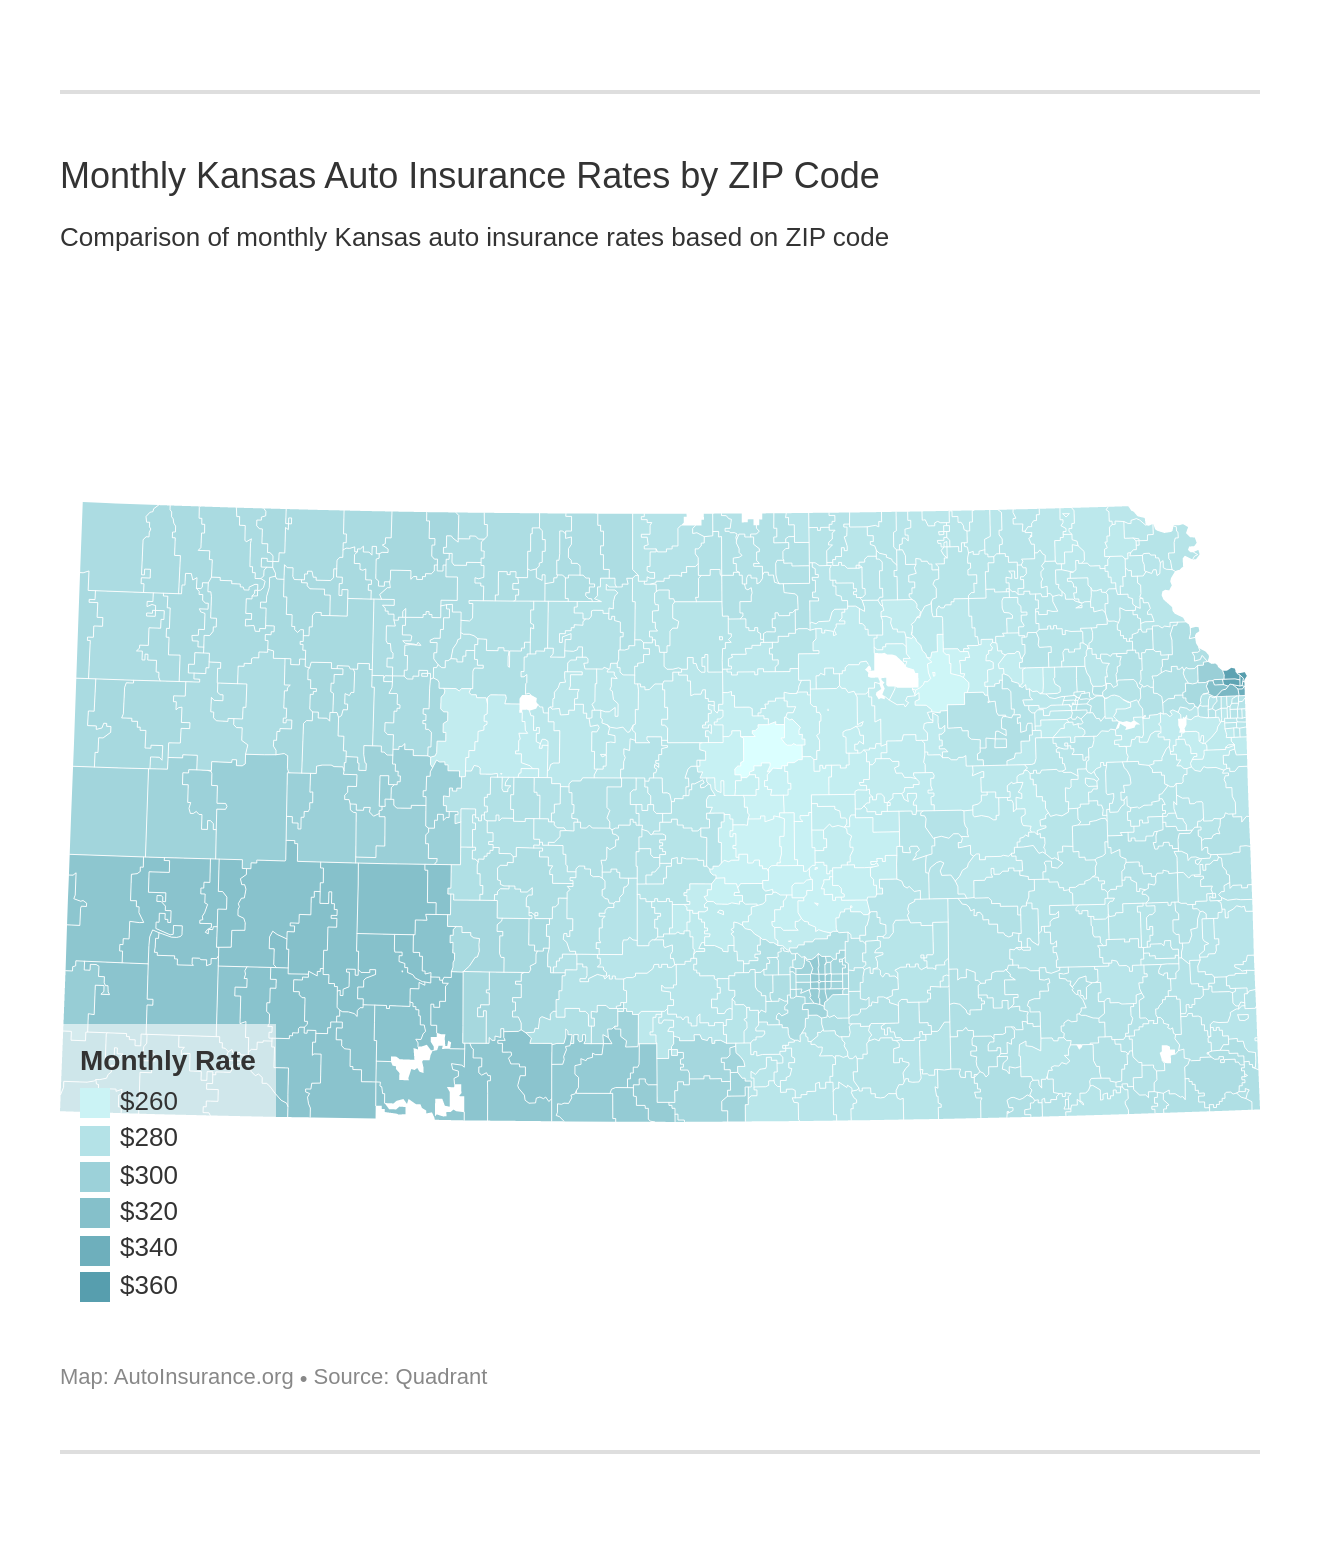 Monthly Kansas Auto Insurance Rates by ZIP Code